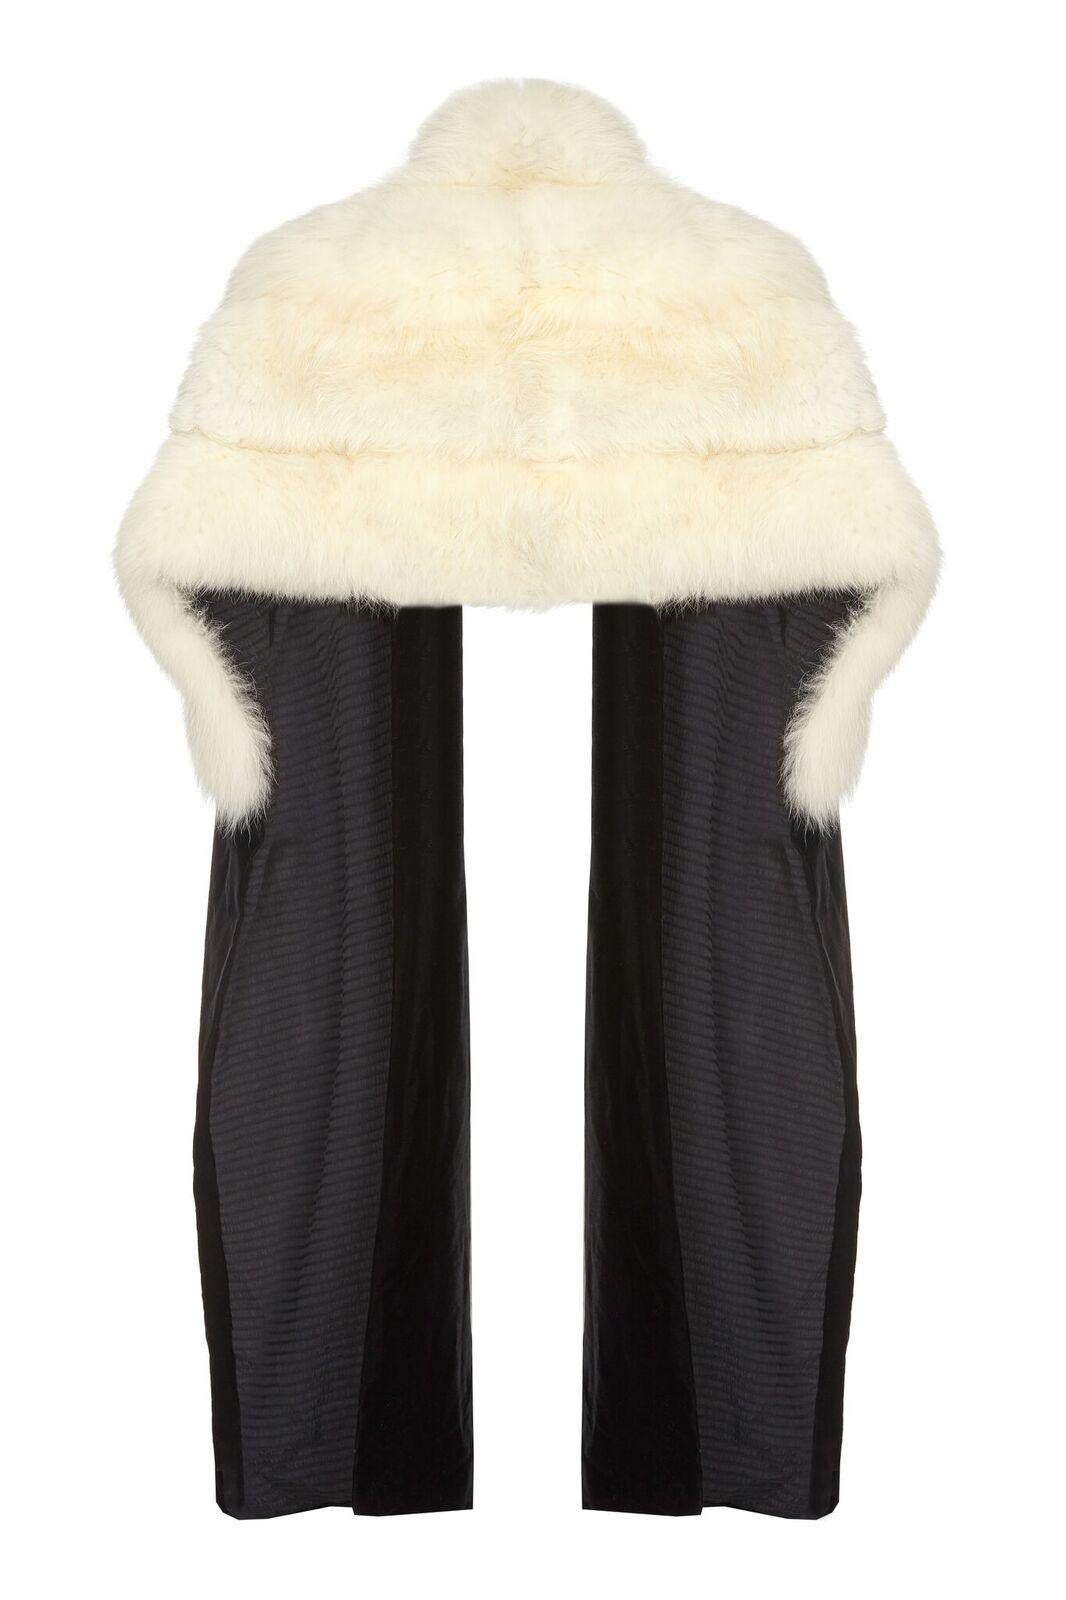 This sensational 1930s white fox fur stole from Albert Hart of London features a contrasting black velvet and silk wrap, and absolutely exudes the luxury and glamour synonymous with the silver screen. The snow white fur is soft and lustrous and